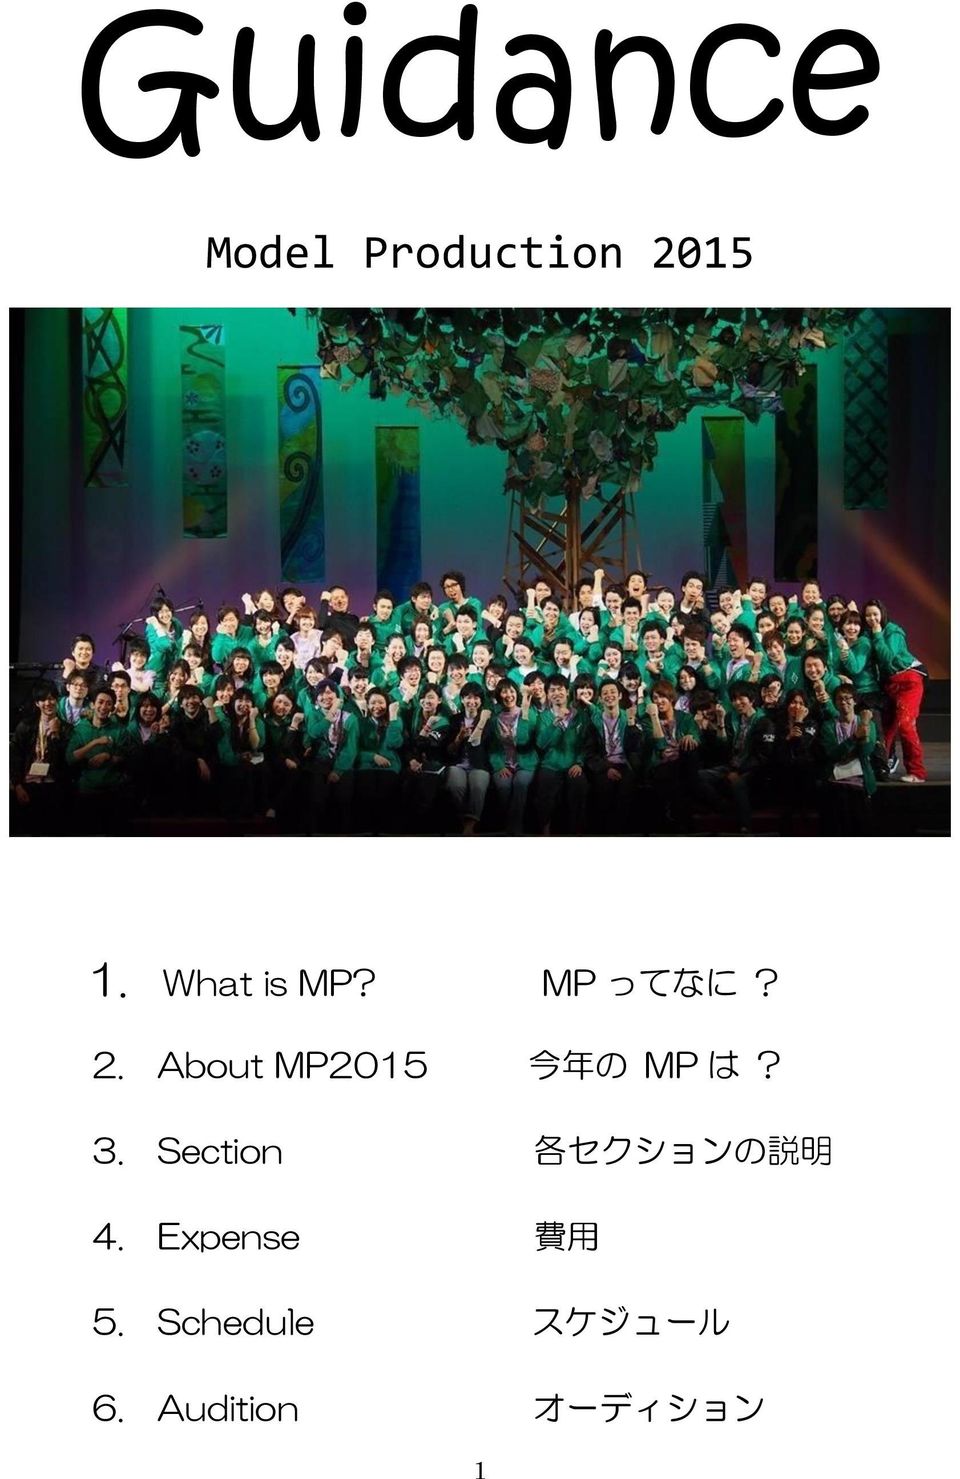 About MP2015 今 年 の MP は? 3.